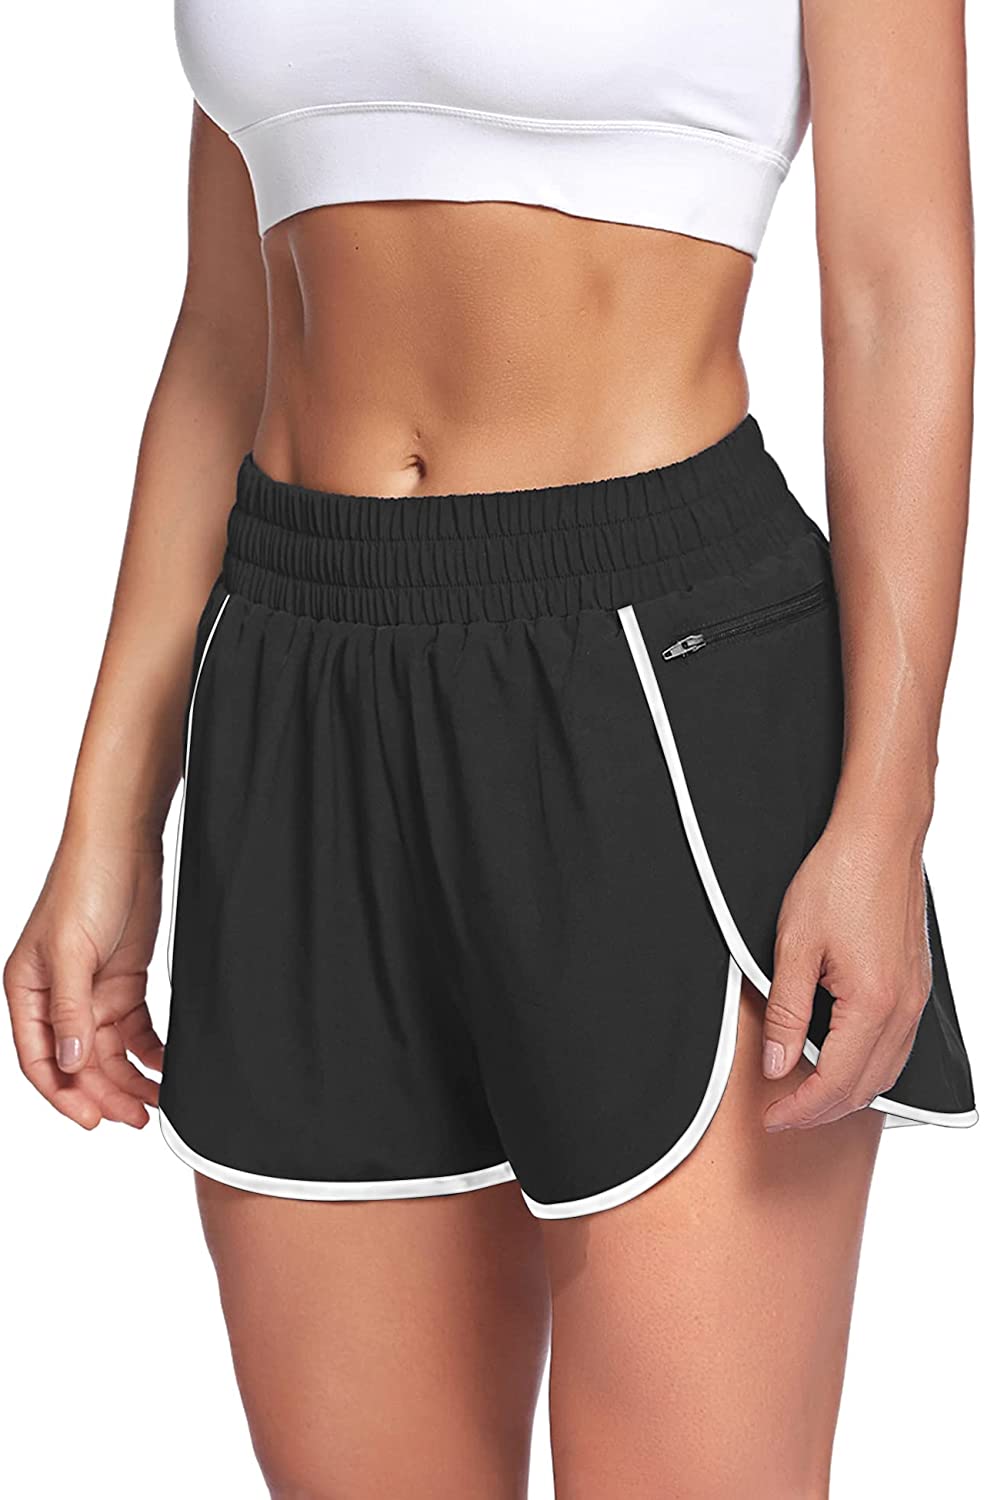 LaLaLa Womens Workout Shorts with Zip Pocket Quick-Dry Athletic Shorts  Sports Elastic Waist Running Shorts with Liner X-Large Black